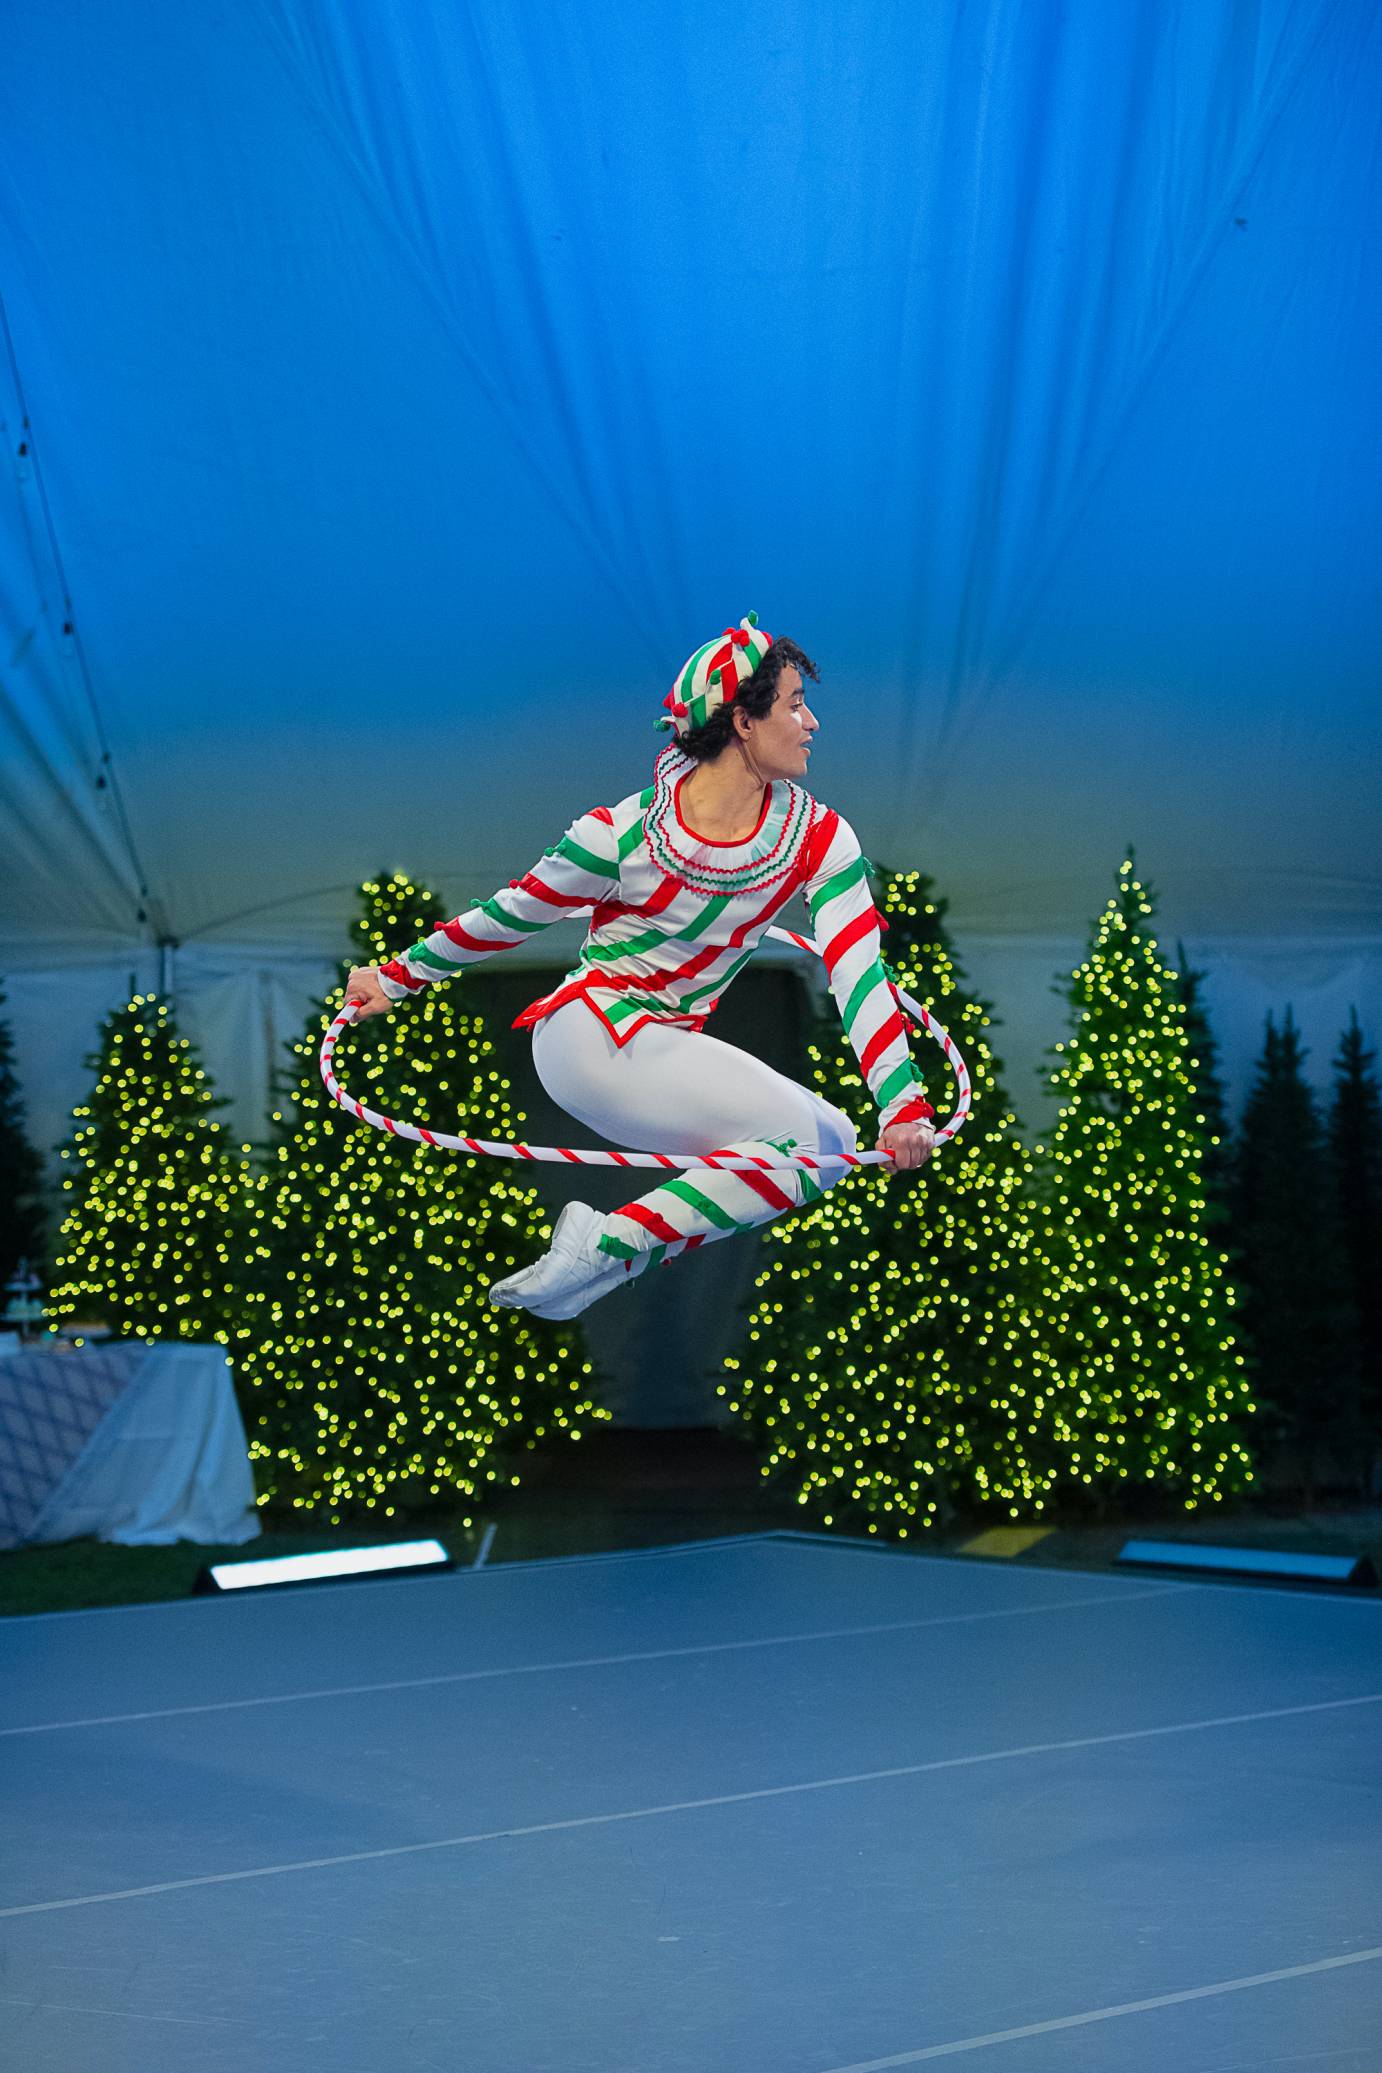 In Candy Cane, a man jumps through a hoop